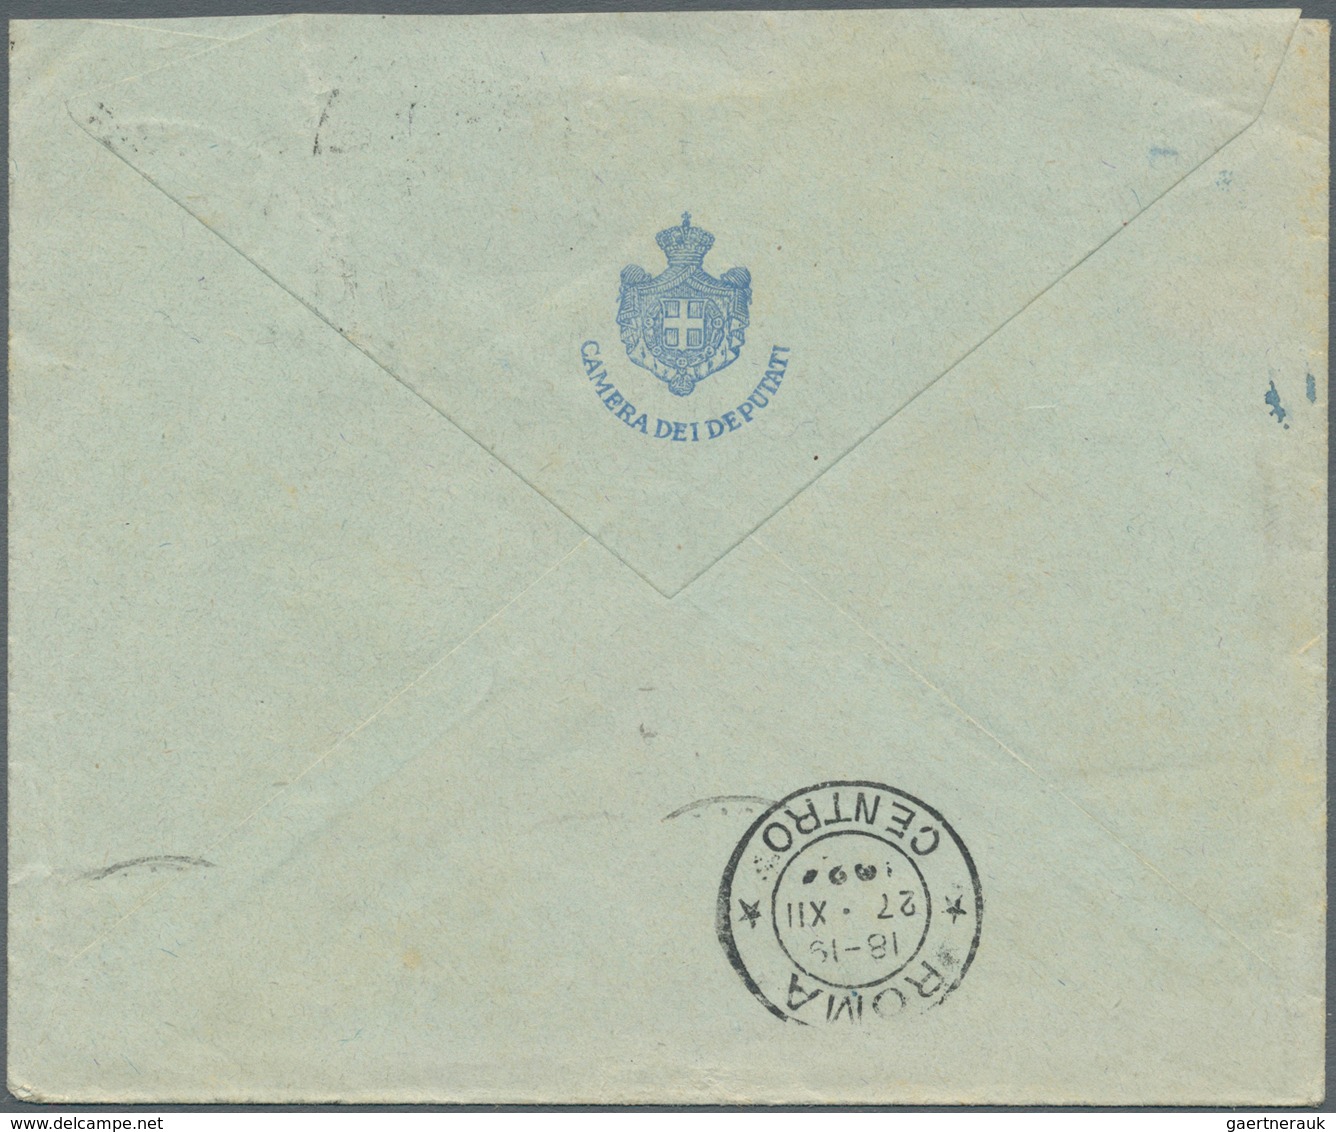 14875 Italien - Stempel: "ROMA CAMERA DEL DEPUTATI" clear on two preprinting covers 1924 and 1925 (one "Il